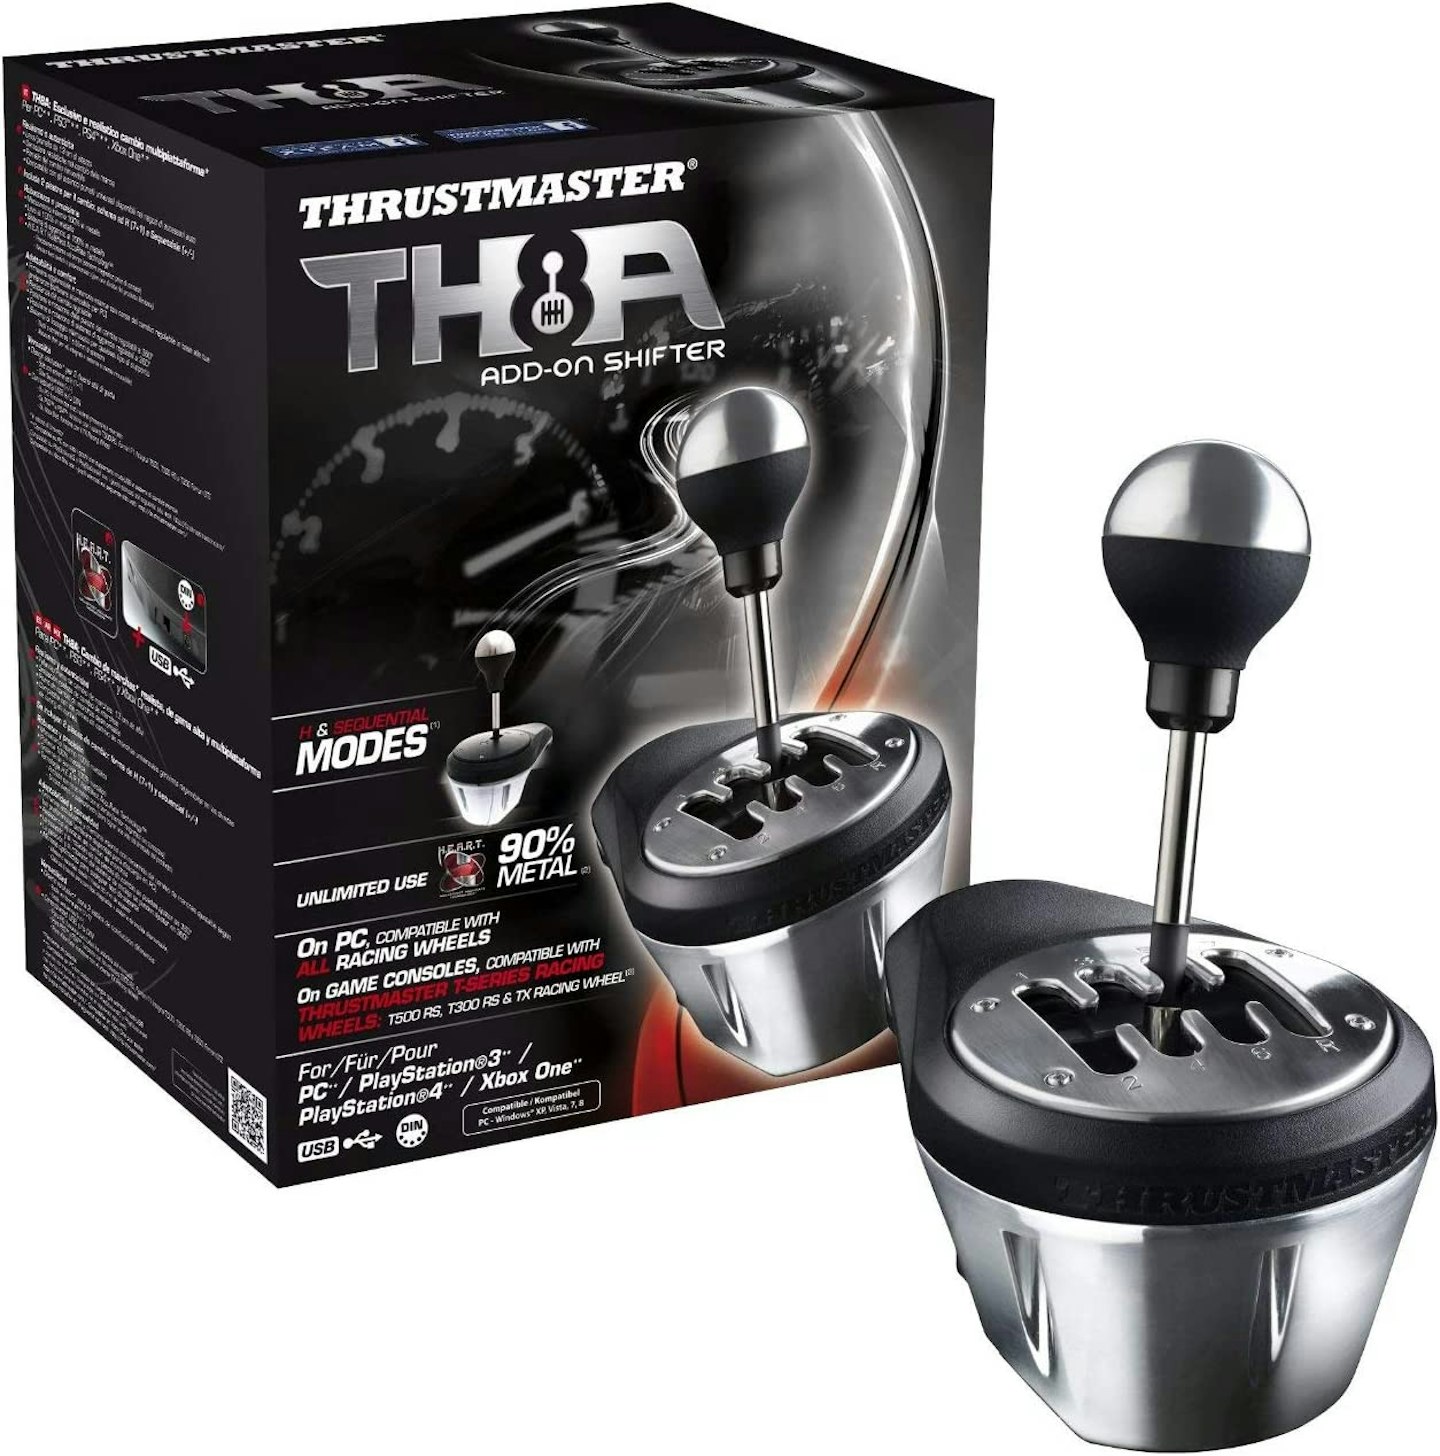 https://images.bauerhosting.com/affiliates/sites/5/2023/01/Thrustmaster-TH8A-Shifter-Add-on.jpg?auto=format&w=1440&q=80